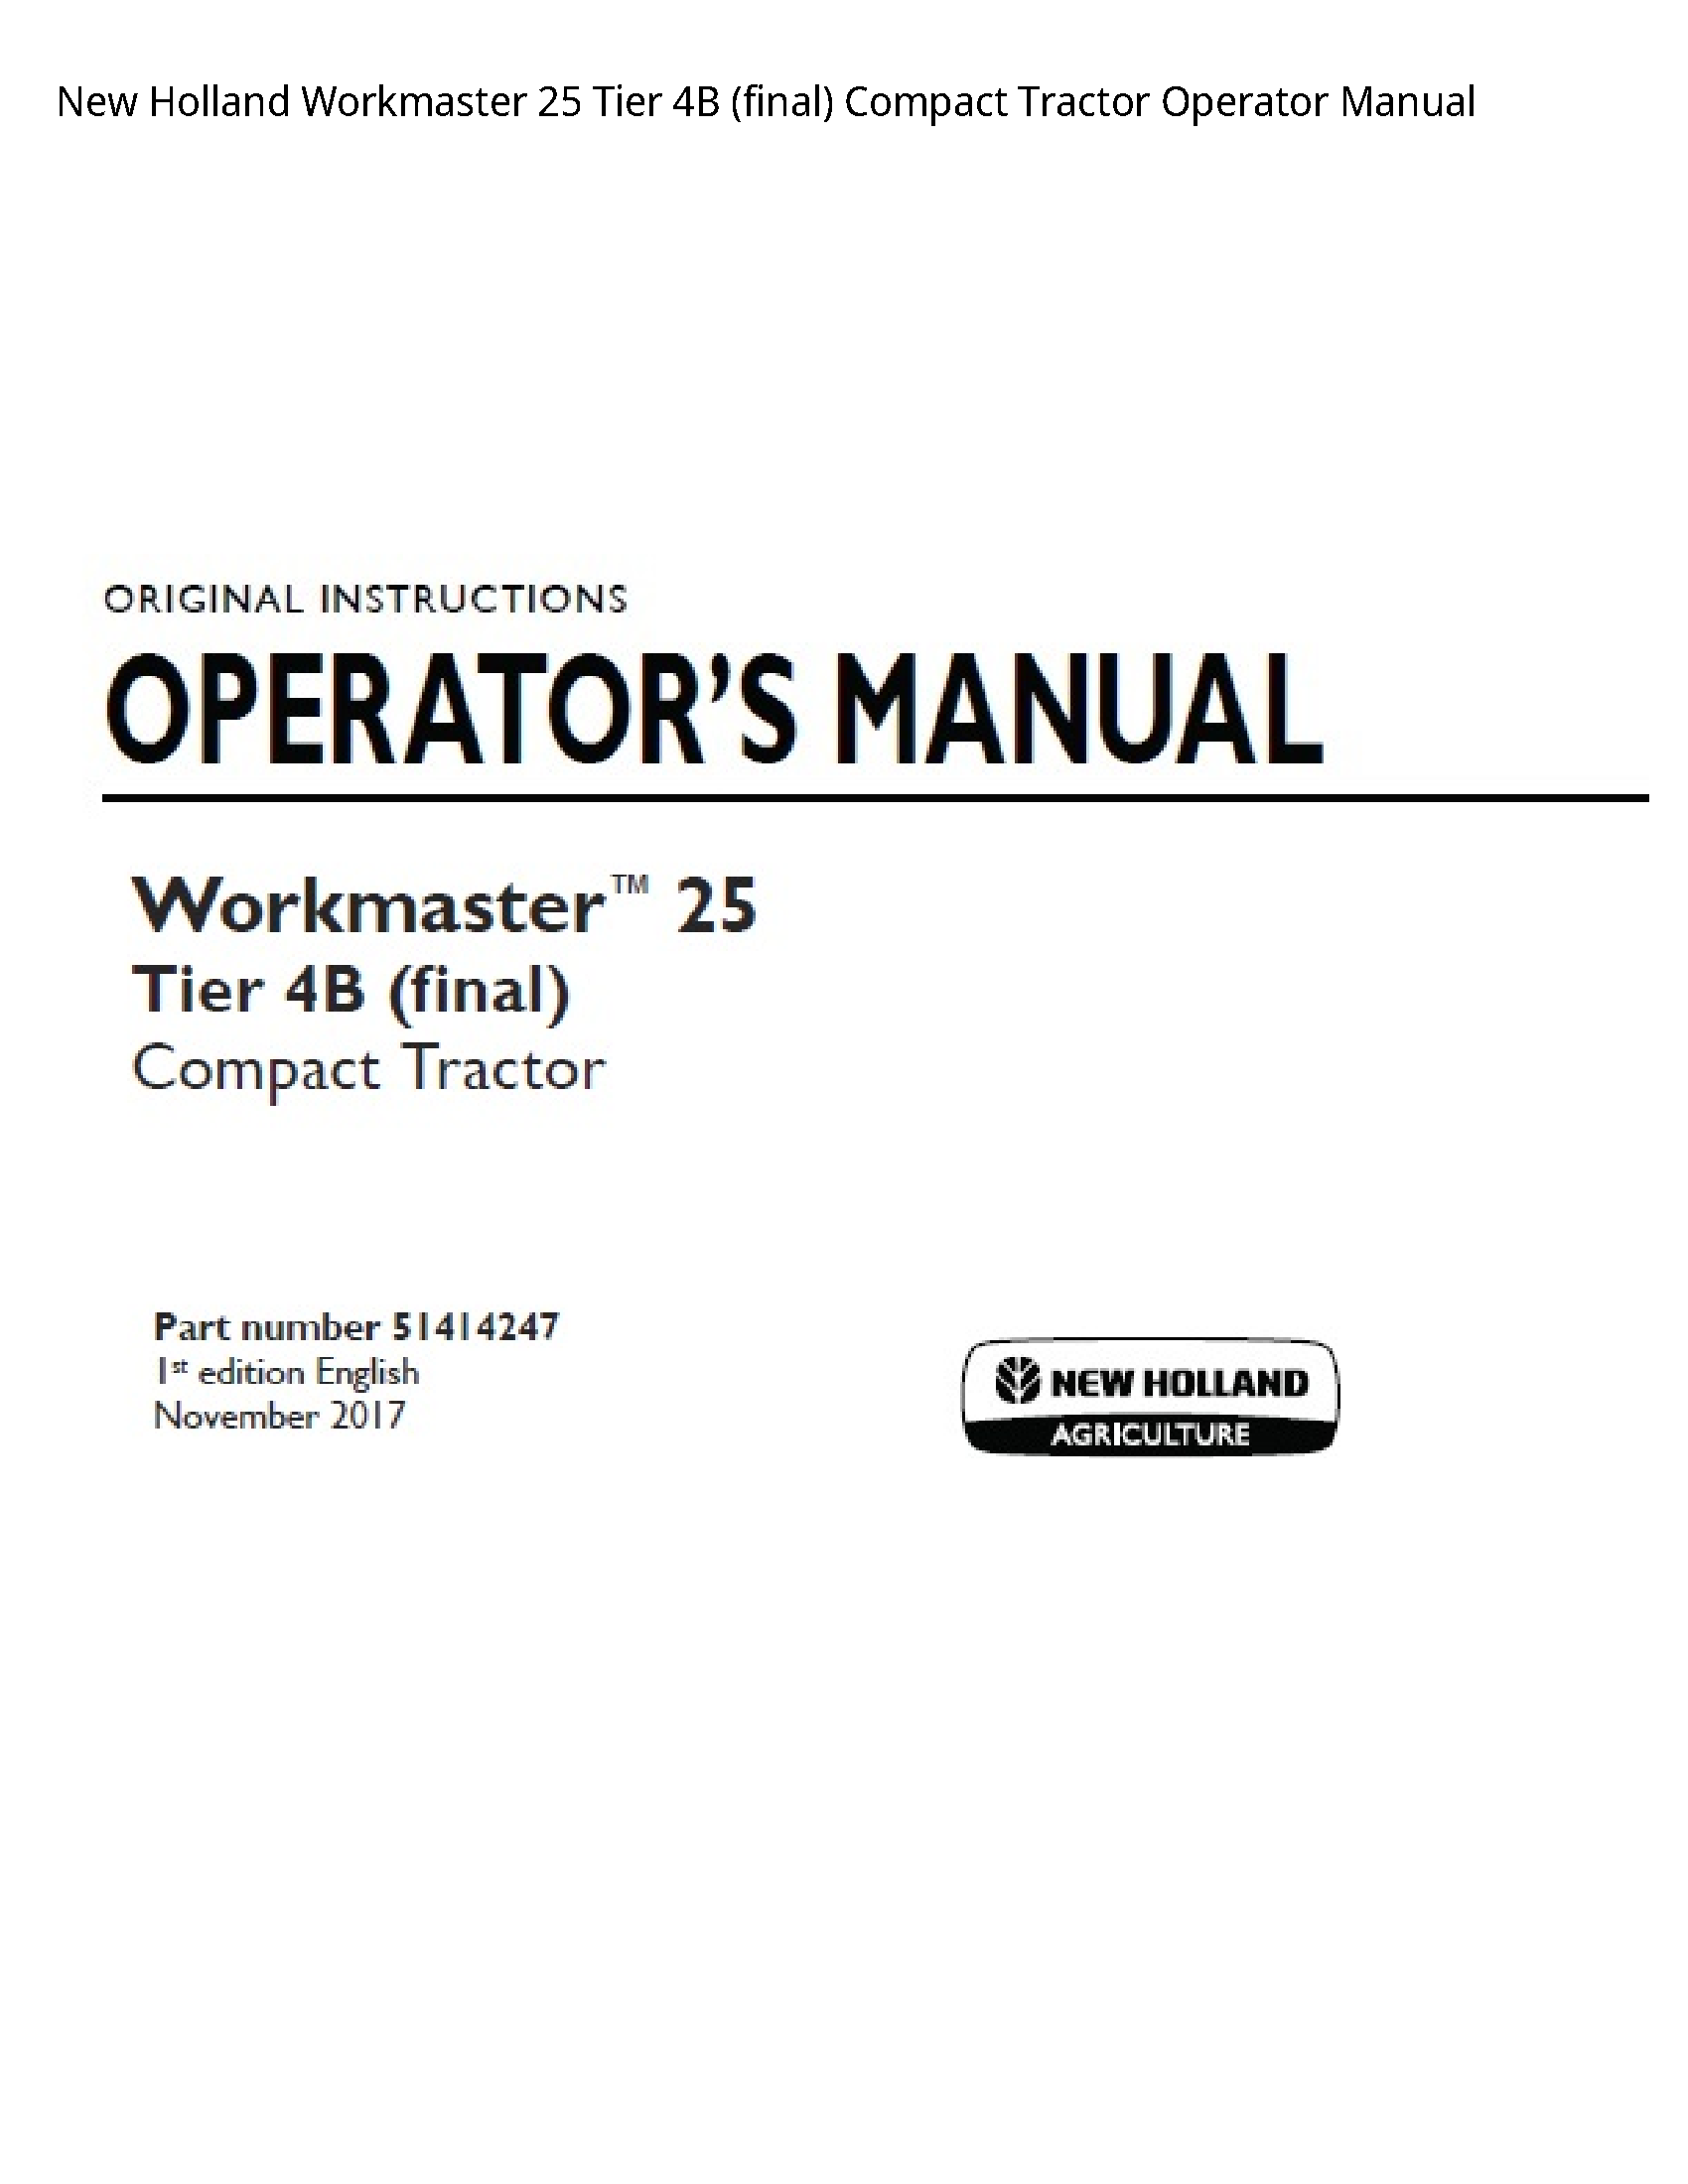 New Holland 25 Workmaster Tier (final) Compact Tractor Operator manual